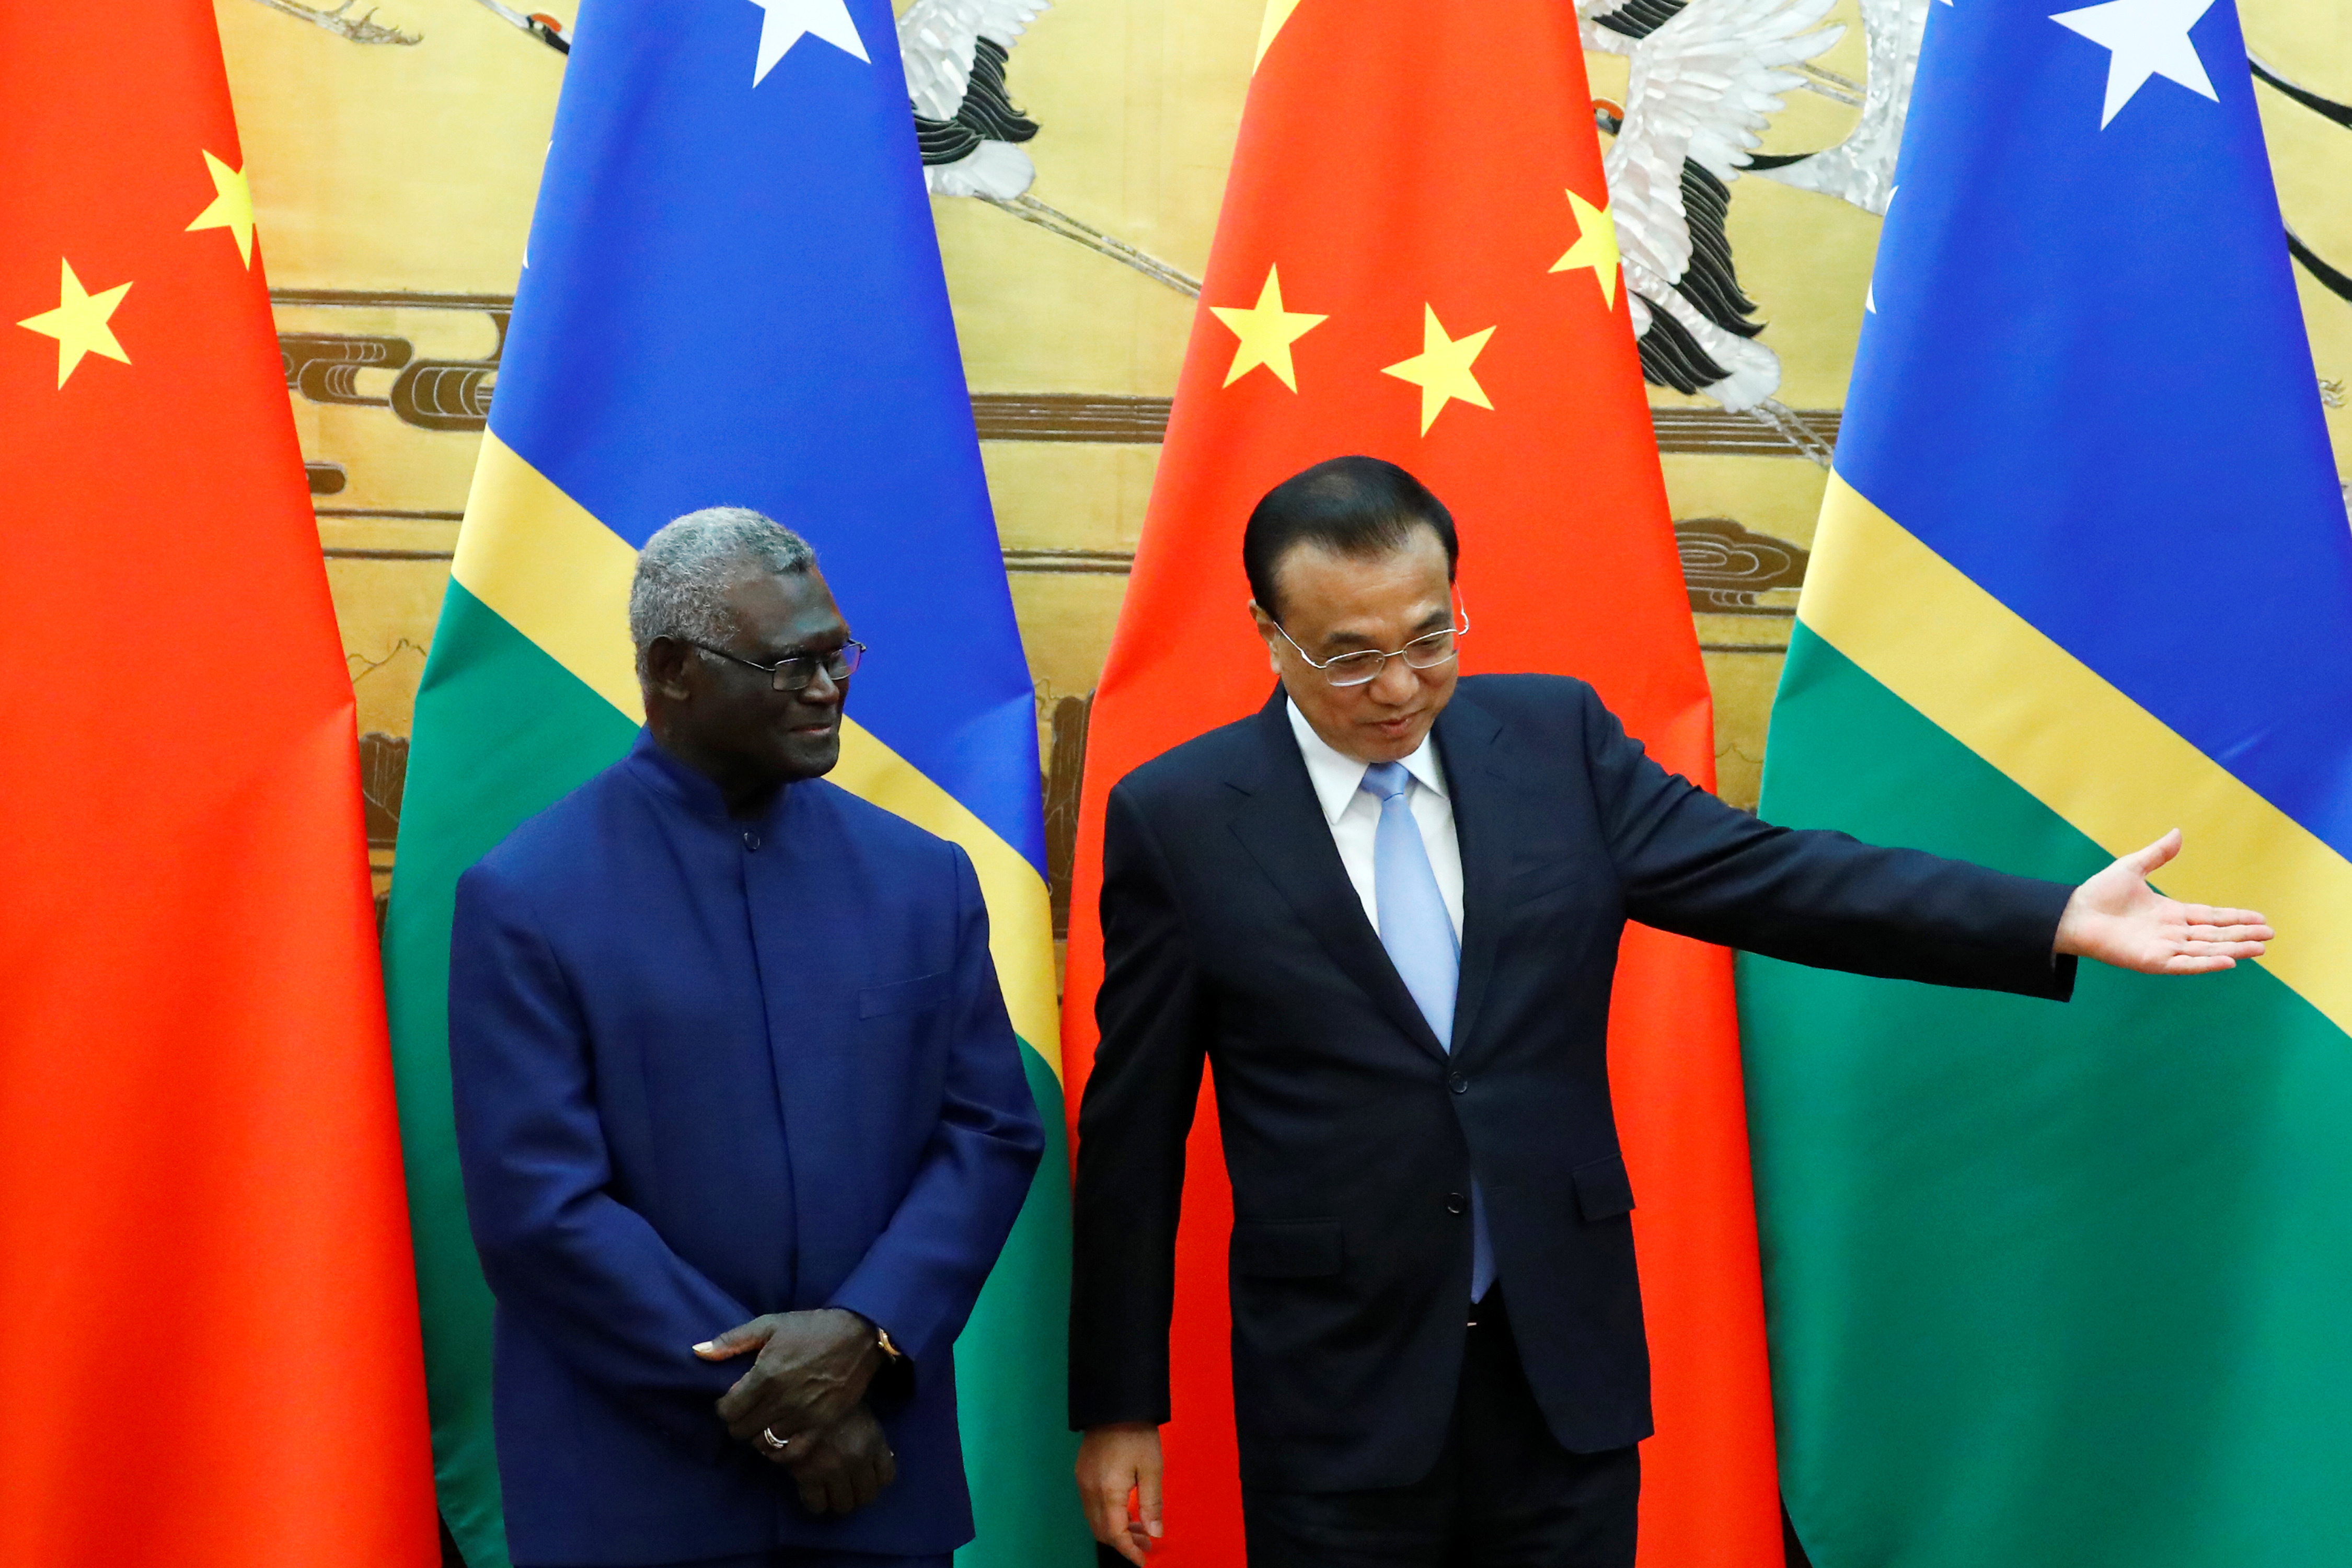 Solomon Islands Prime Minister Manasseh Sogavare and Chinese Premier Li Keqiang attend a signing ceremony at the Great Hall of the People in Beijing